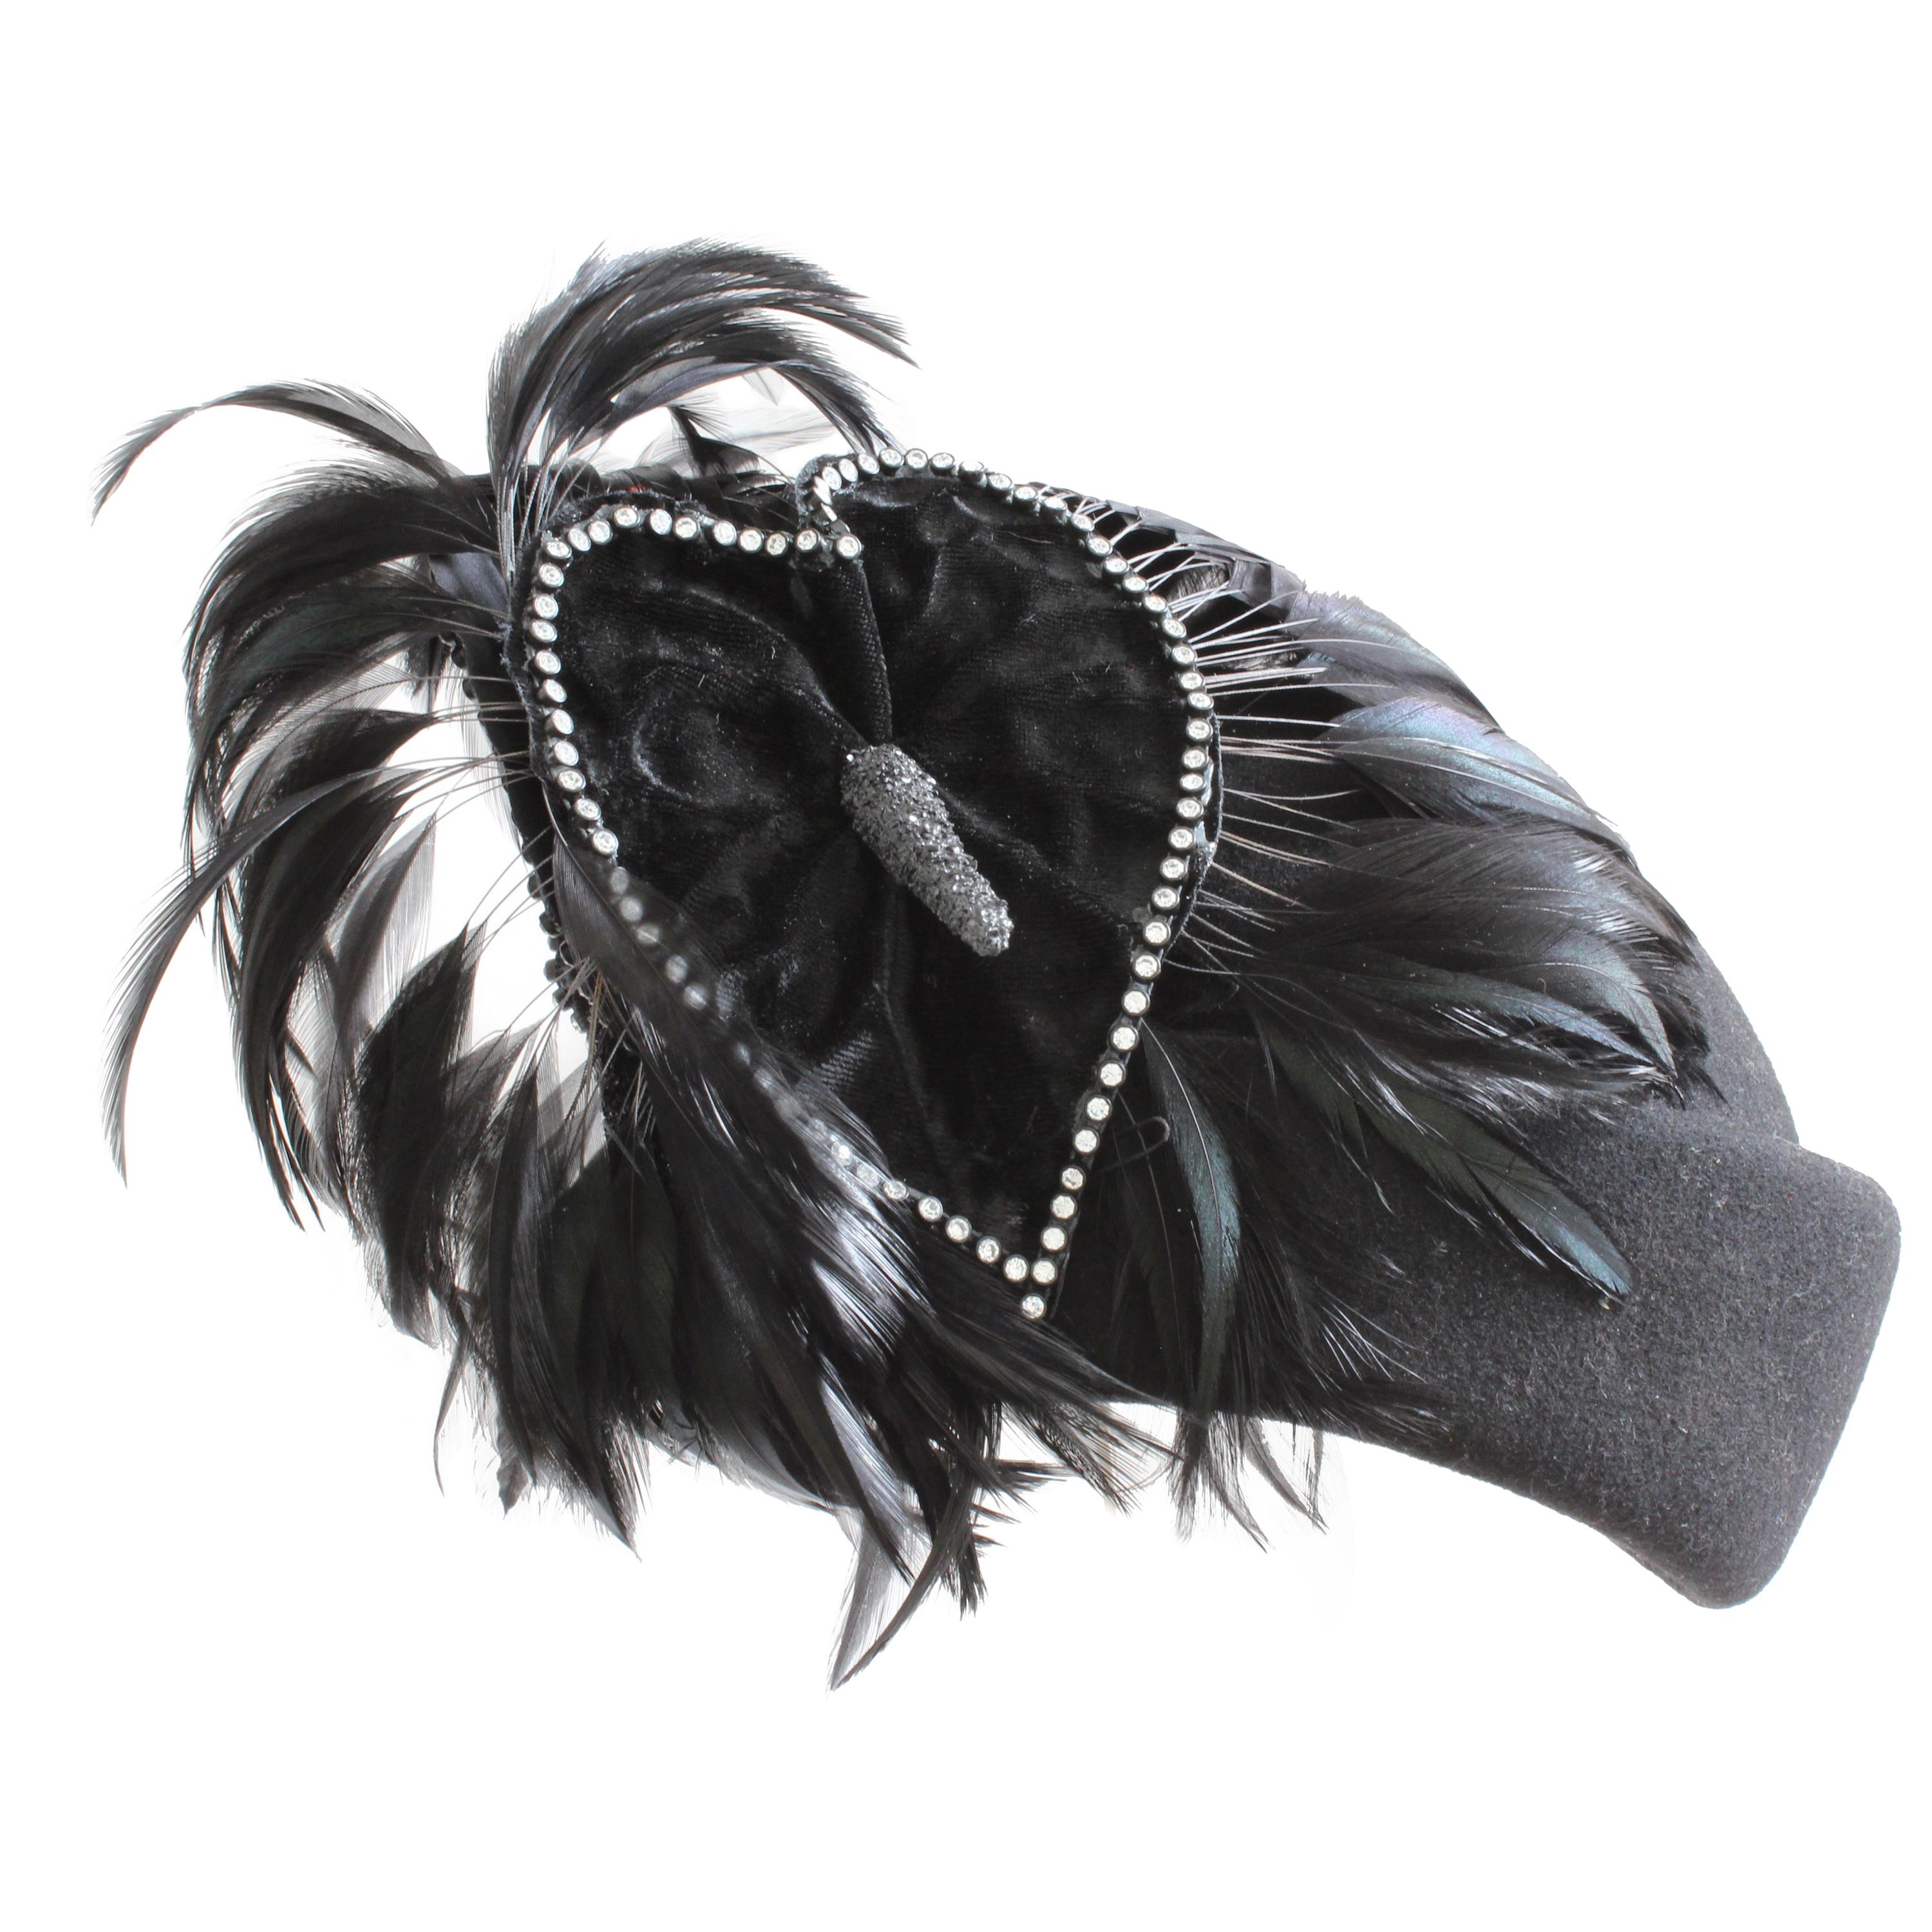 Jack McConnell Boutique Black Wool Clochette Hat with Feathers 1960s Bollman Hat For Sale